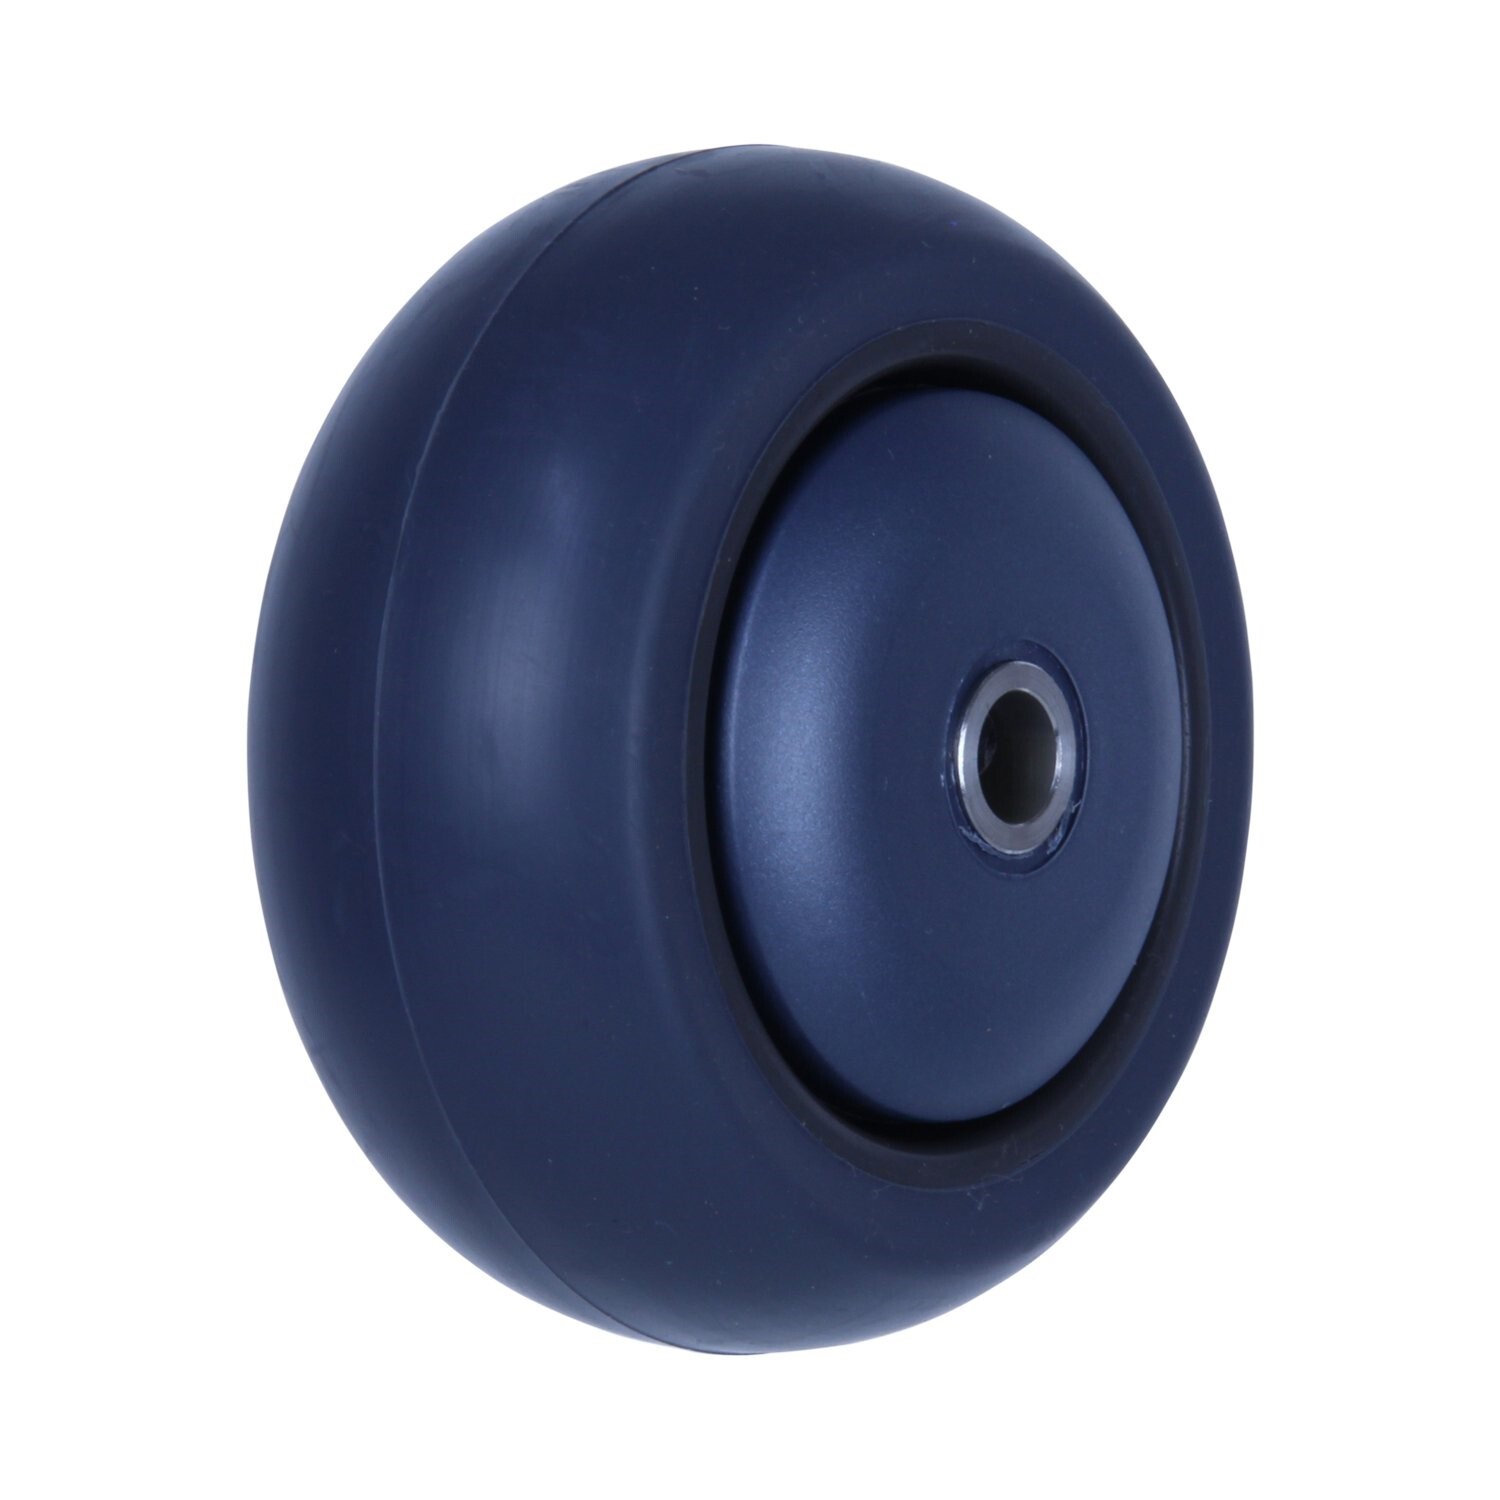 85kg Rated TPE Thermo Plastic Elastomer Wheel - 75 x 32mm - Ball Bearing